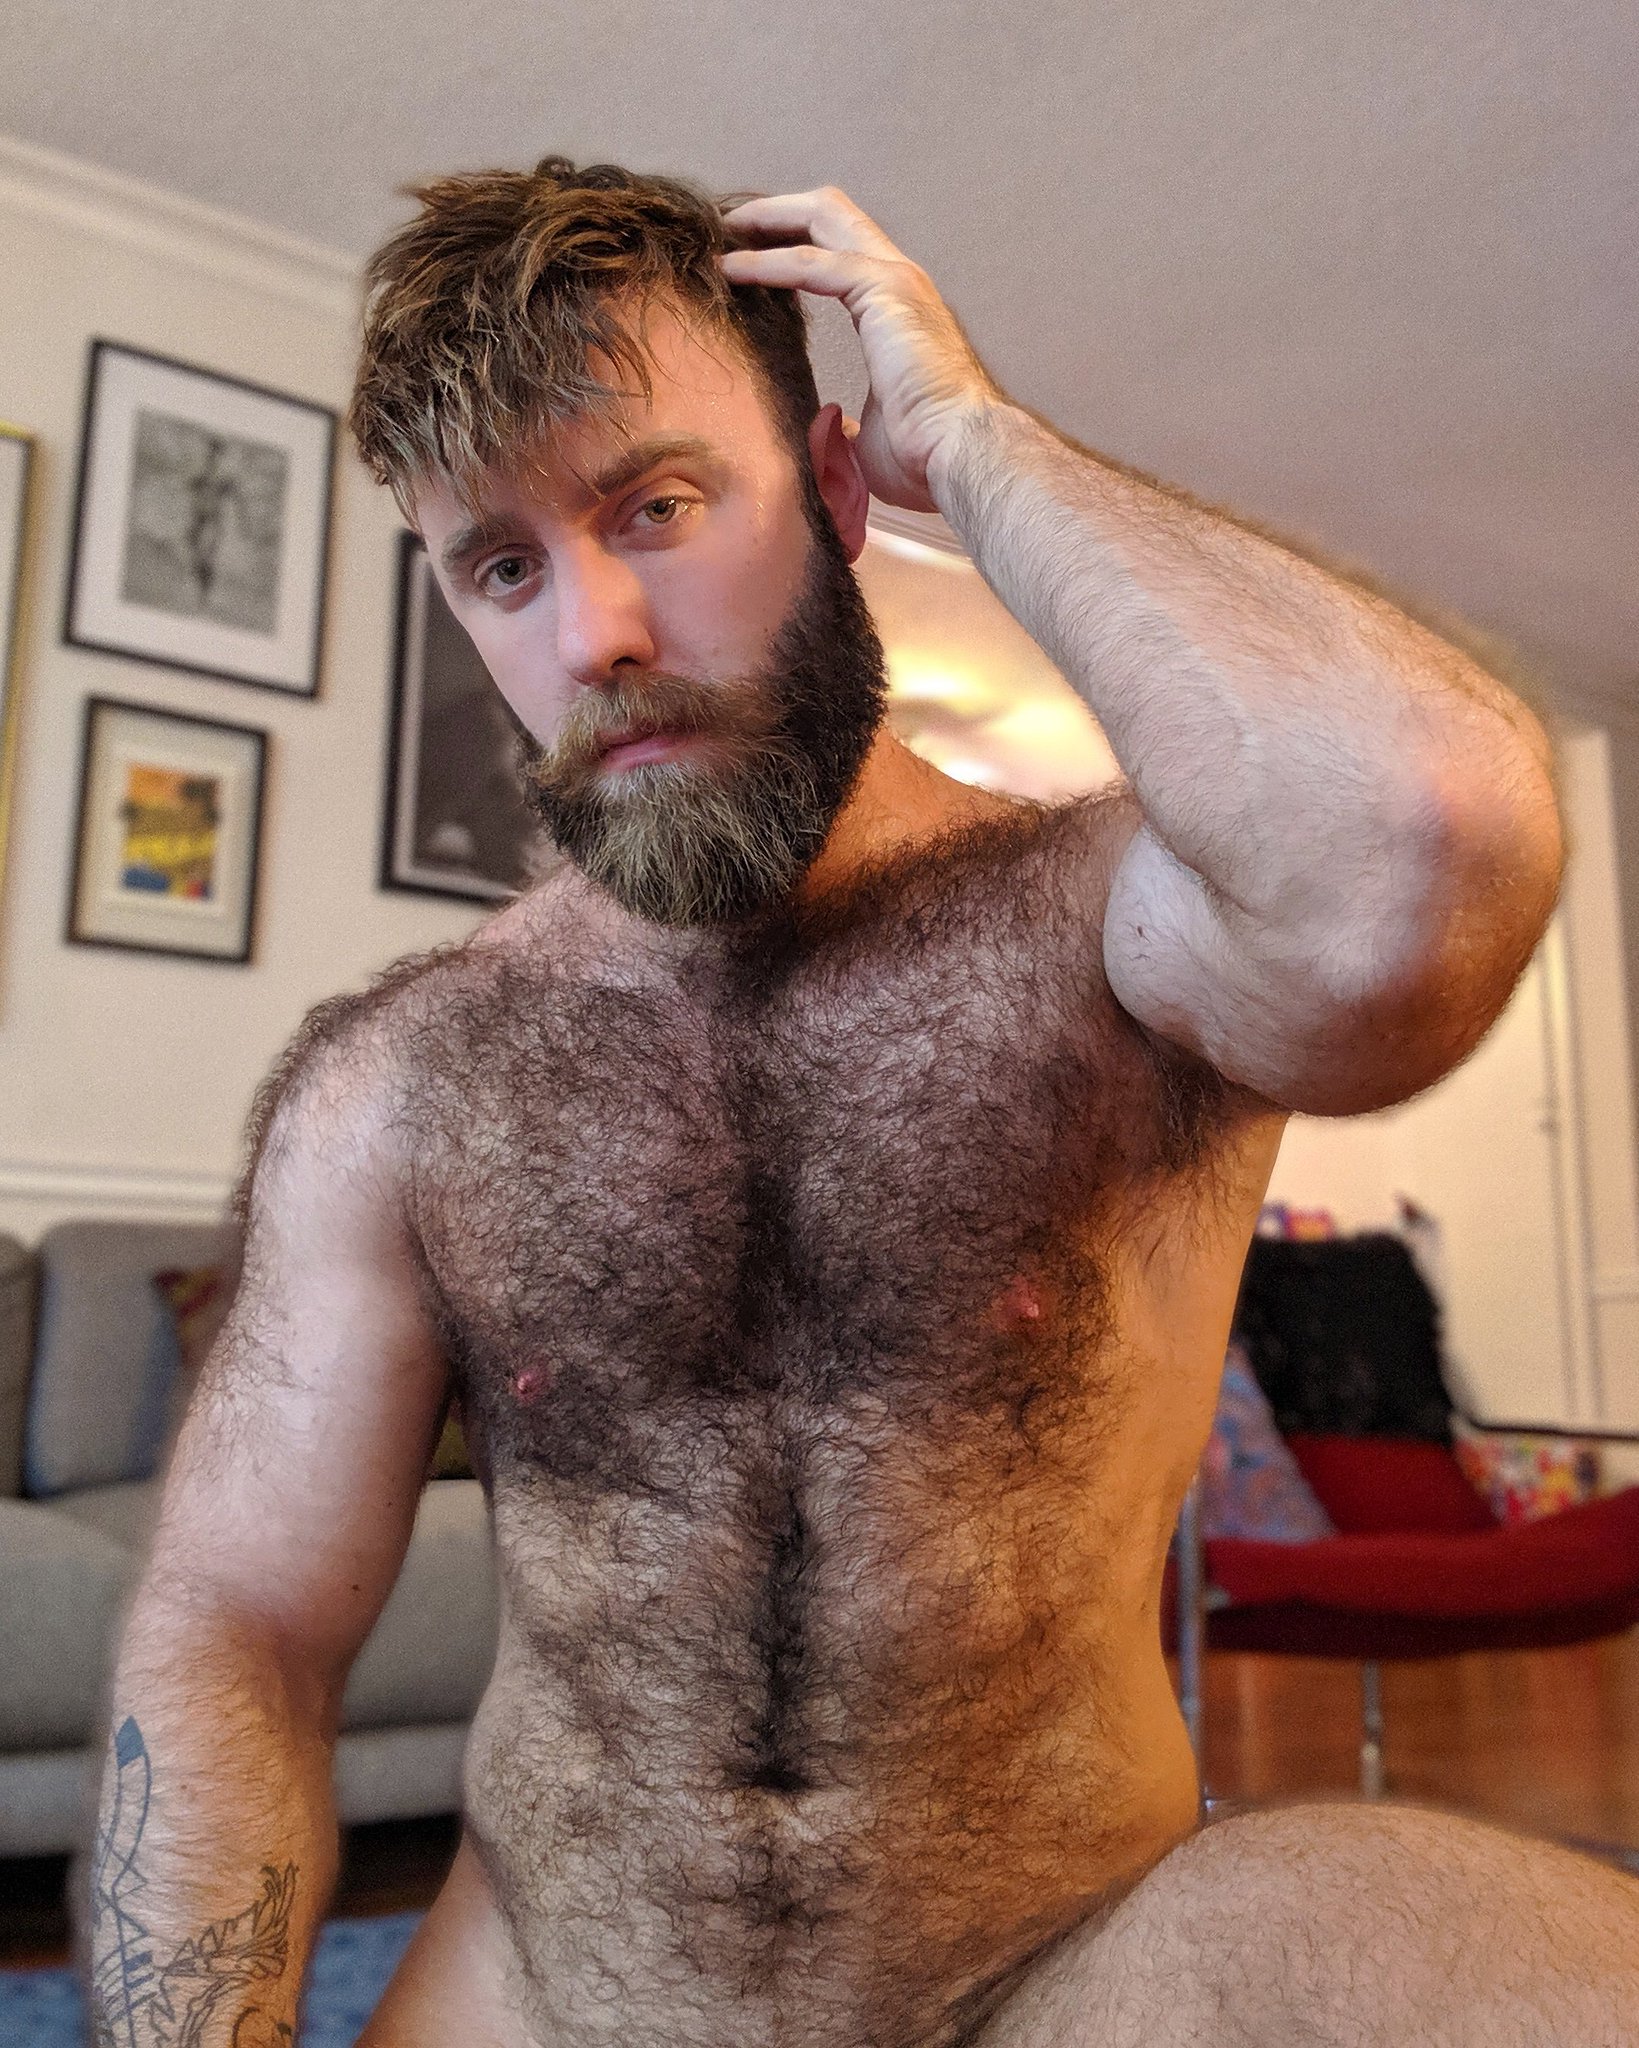 “💦Would you be down to get sweaty with someone this hairy?!🤔” .